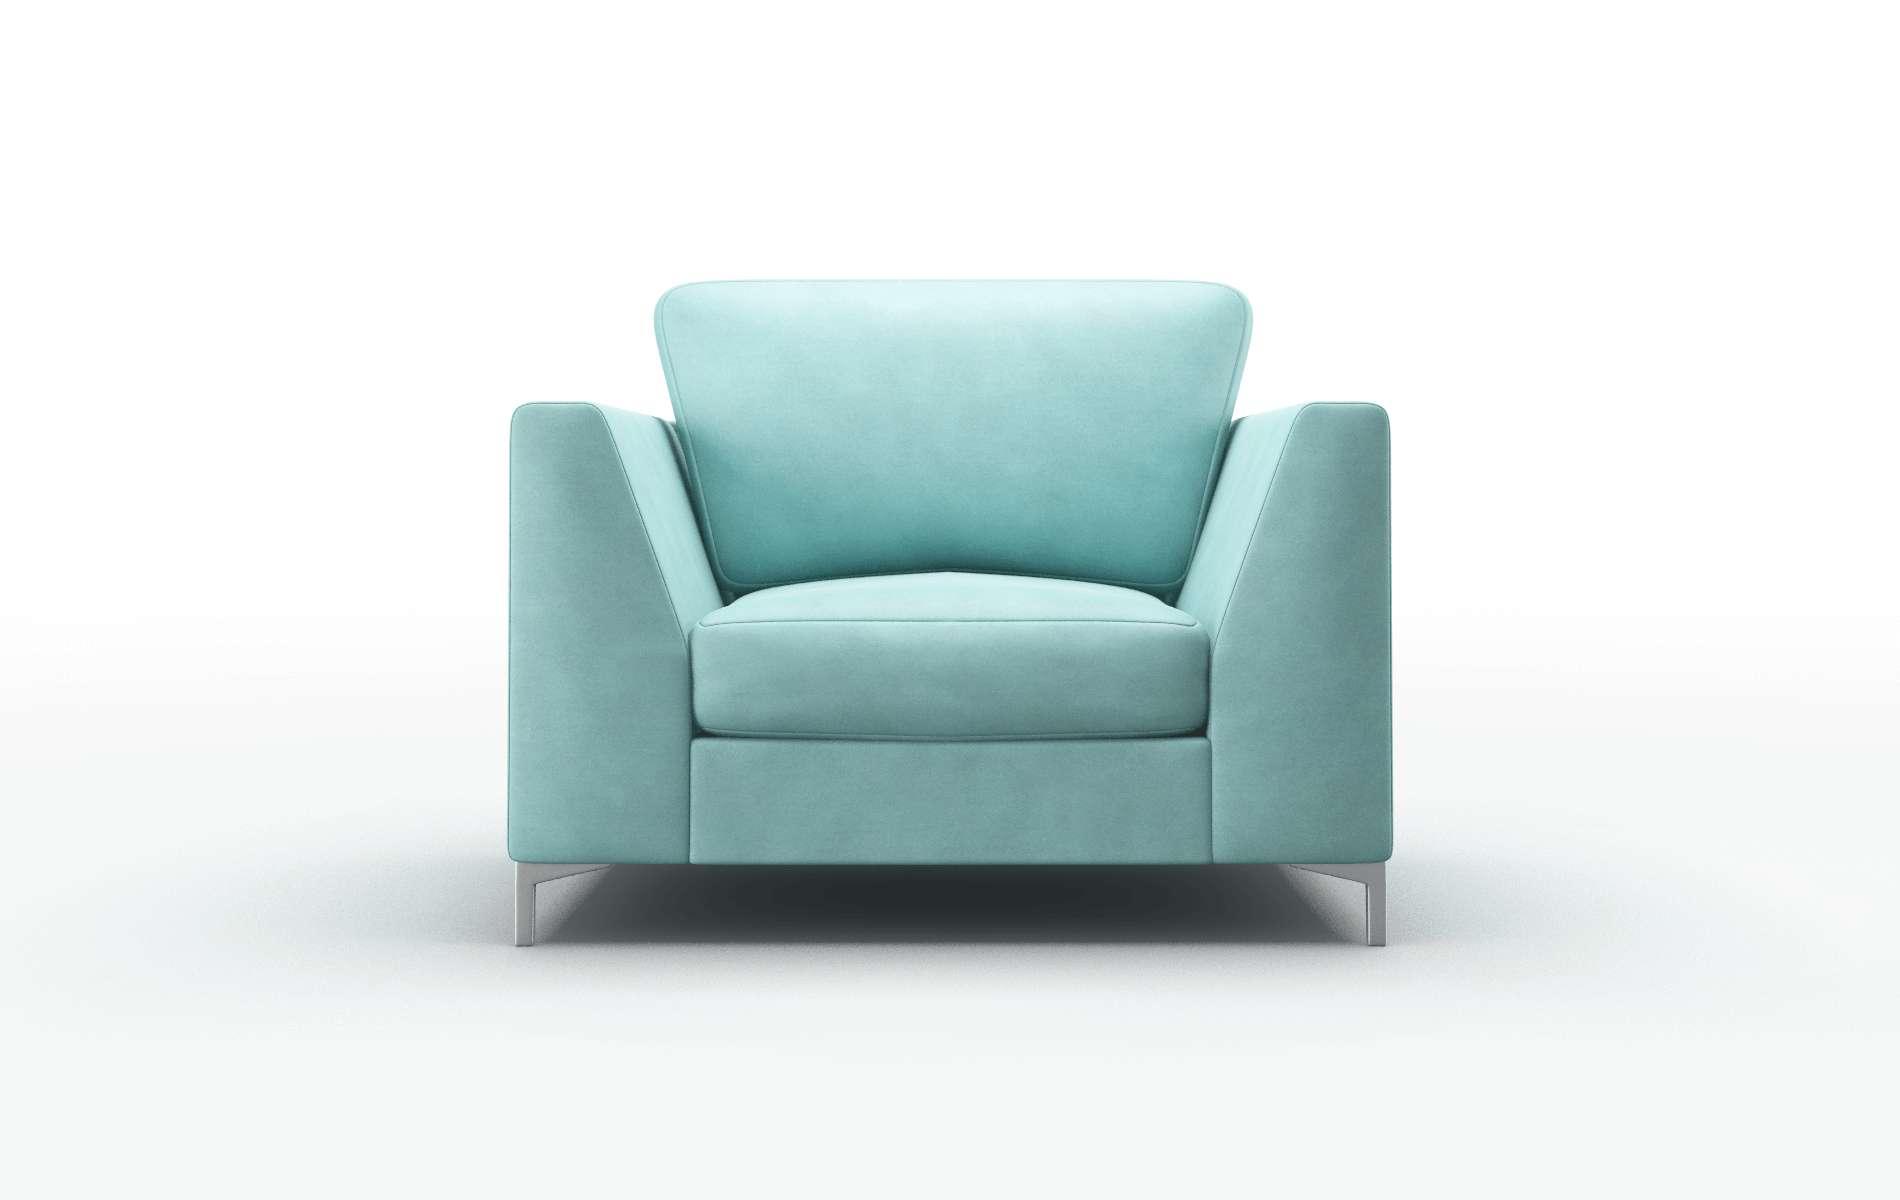 Royal Curious Turquoise chair metal legs